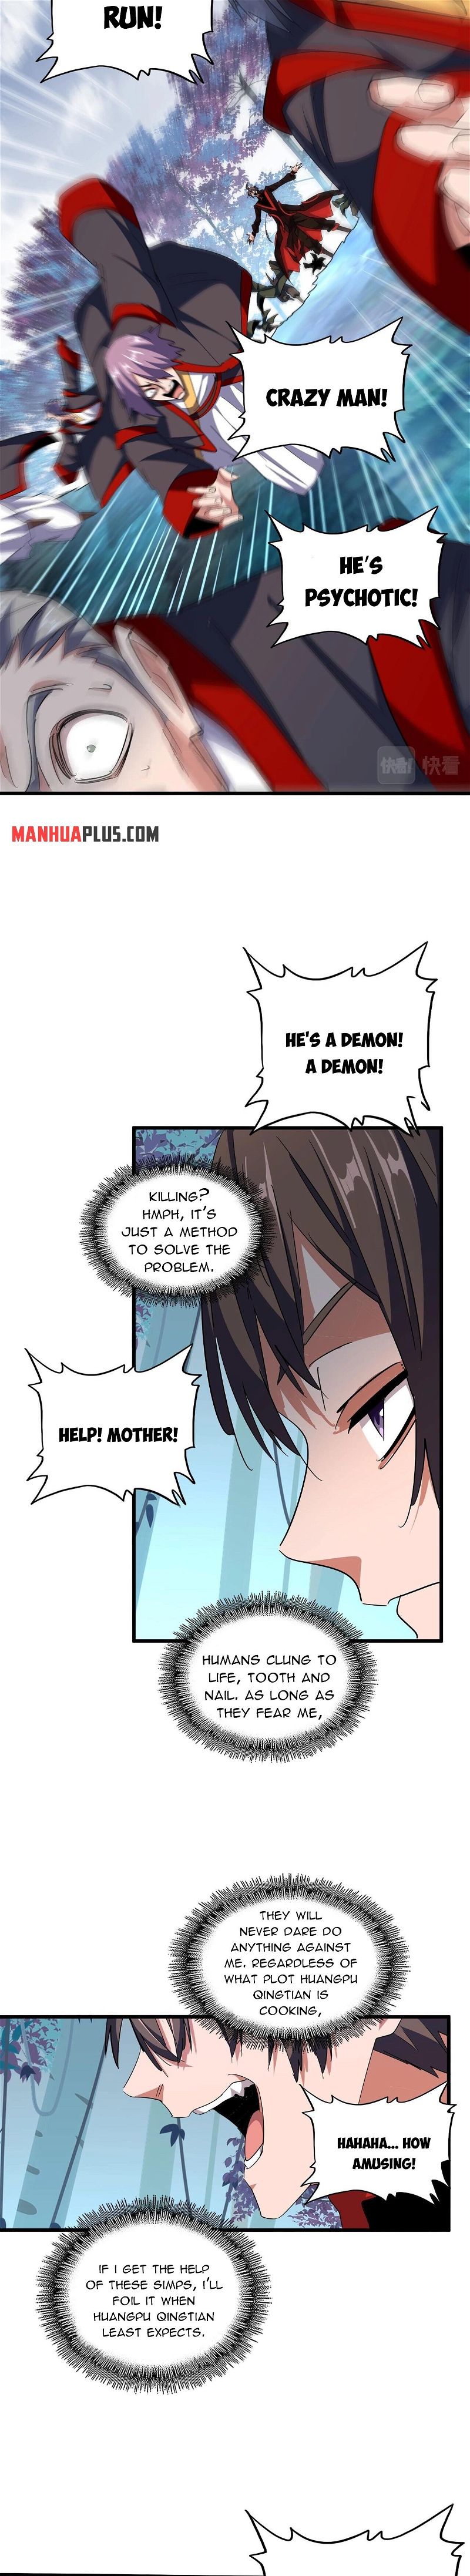 Demon Magic Emperor Chapter 321 page 3 - MangaWeebs.in